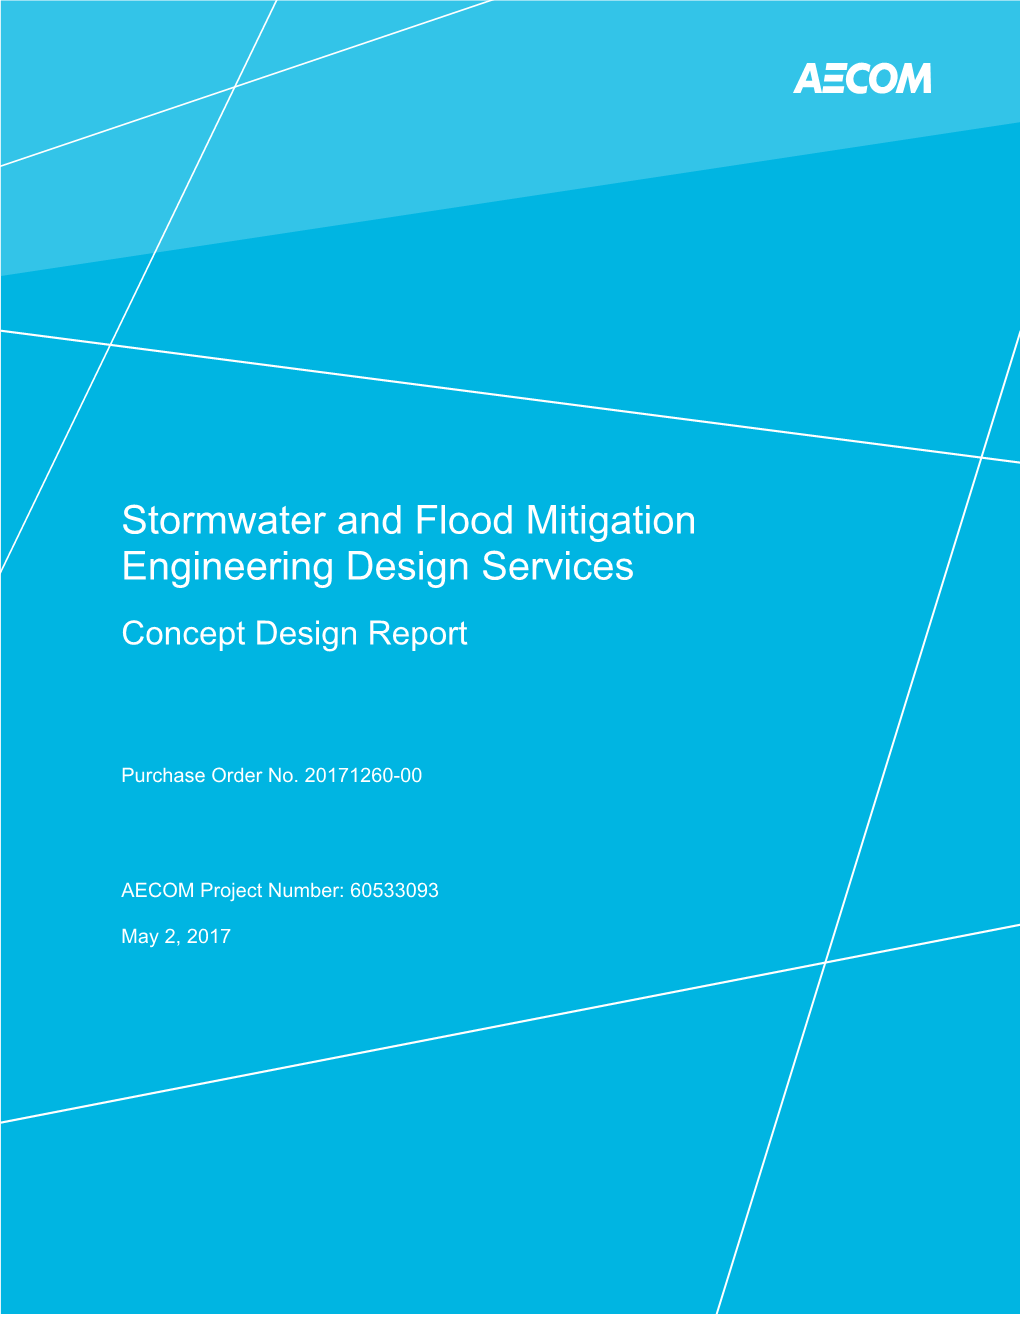 Stormwater and Flood Mitigation- Concept Design Report